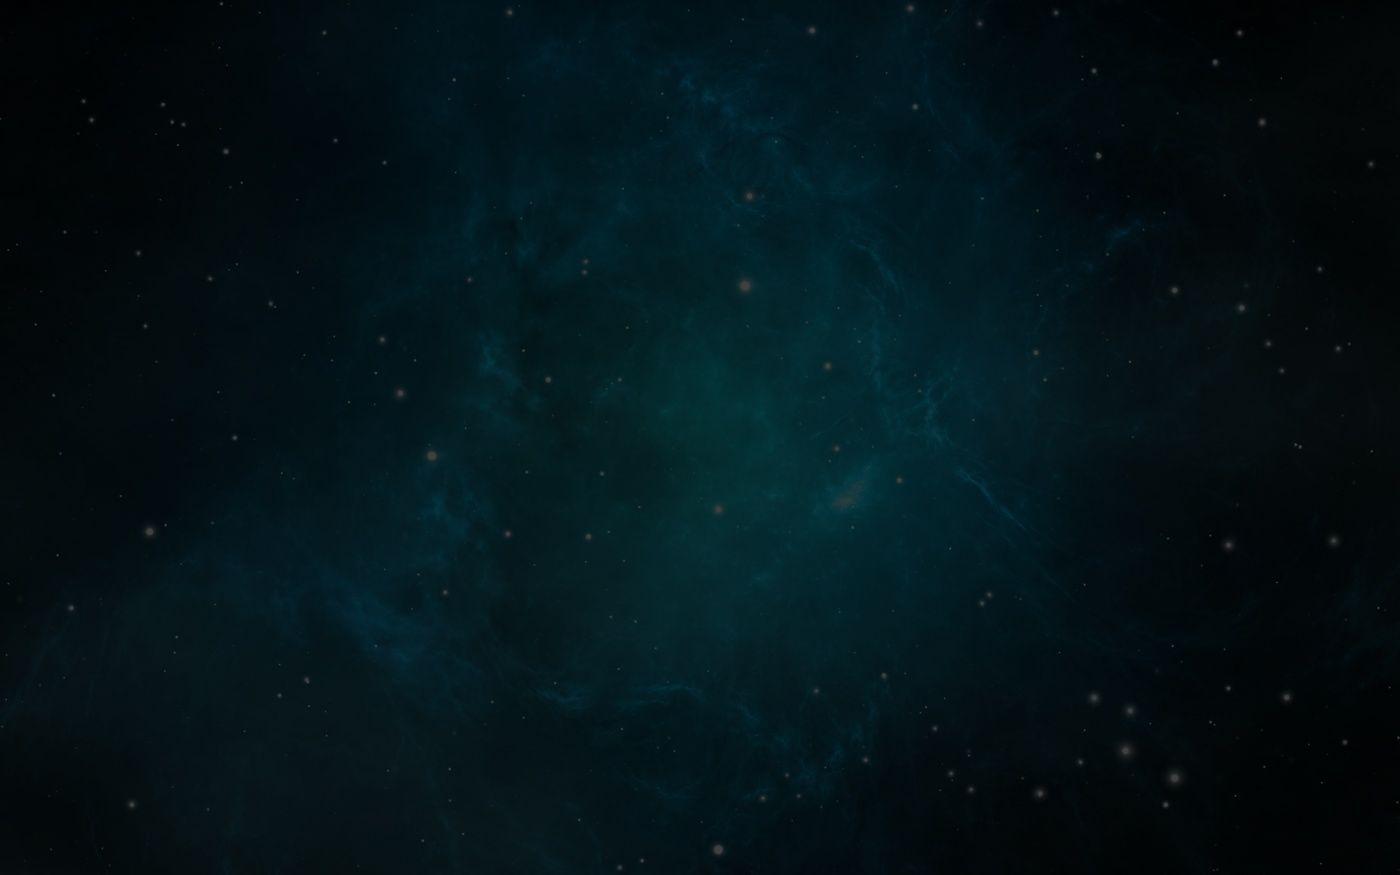 A Star Studded Sky Download Free  Banner Background Image on Lovepik   500831534